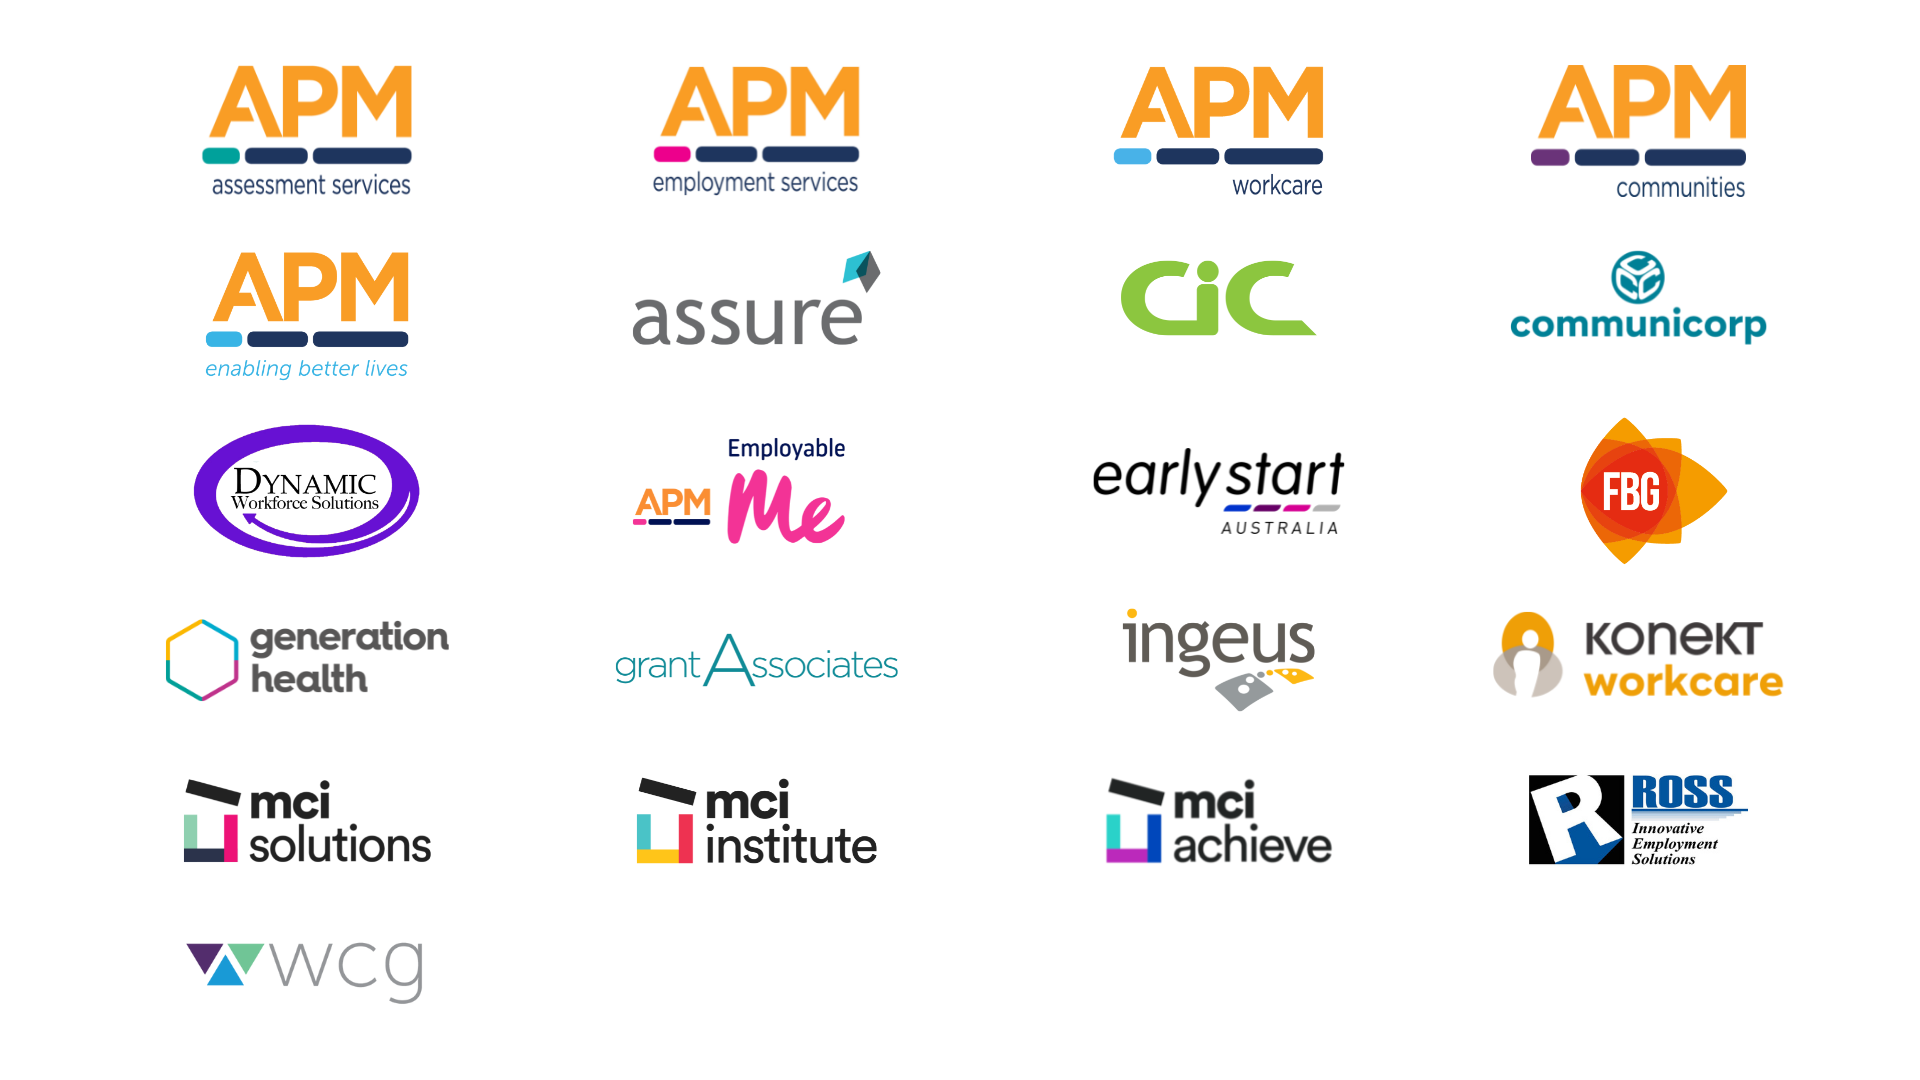 APM Group logos from global APM businesses